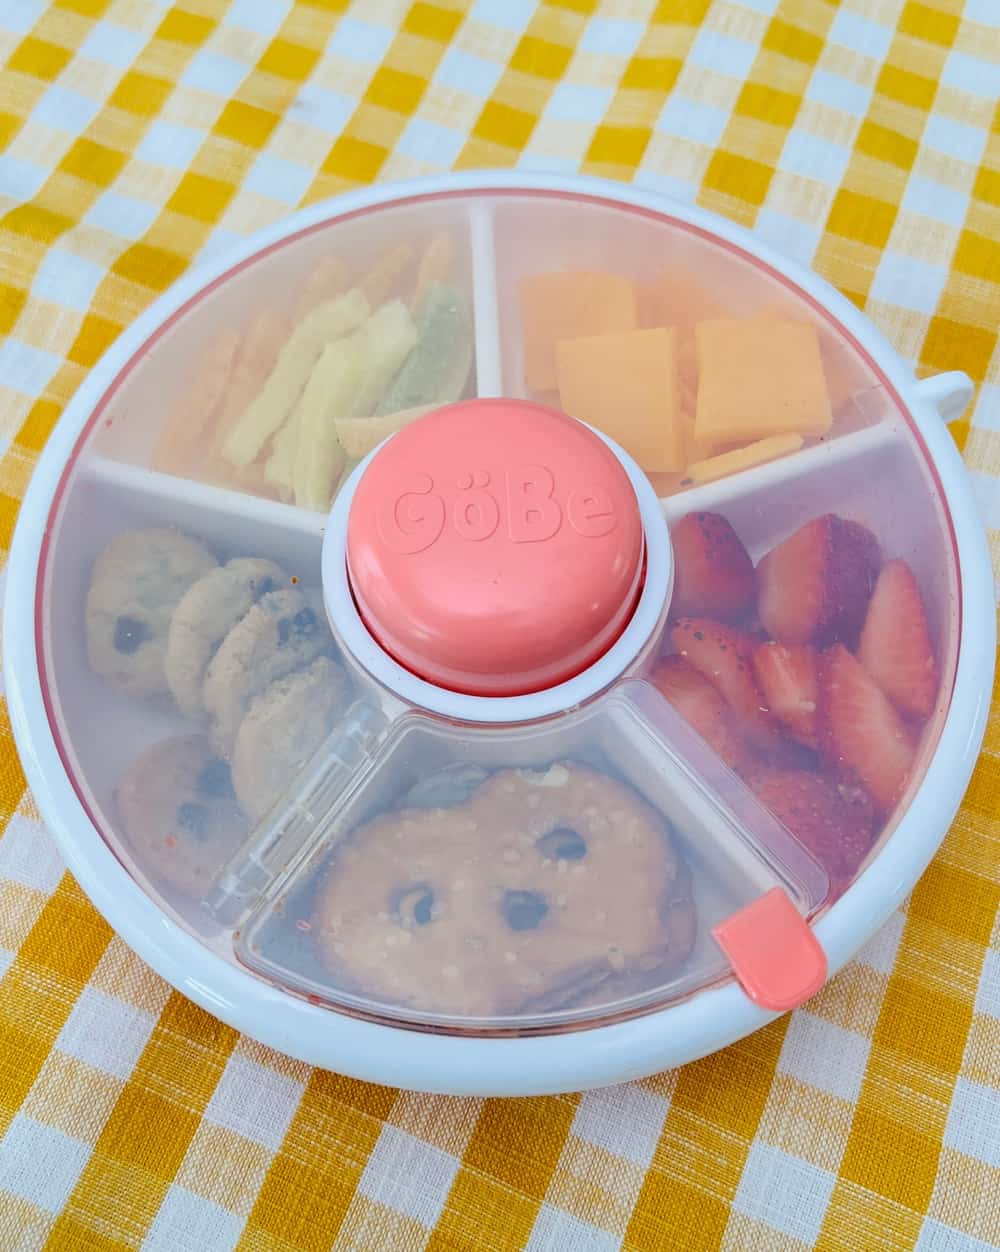 Gobe Kids Lunchbox with Snack Spinner